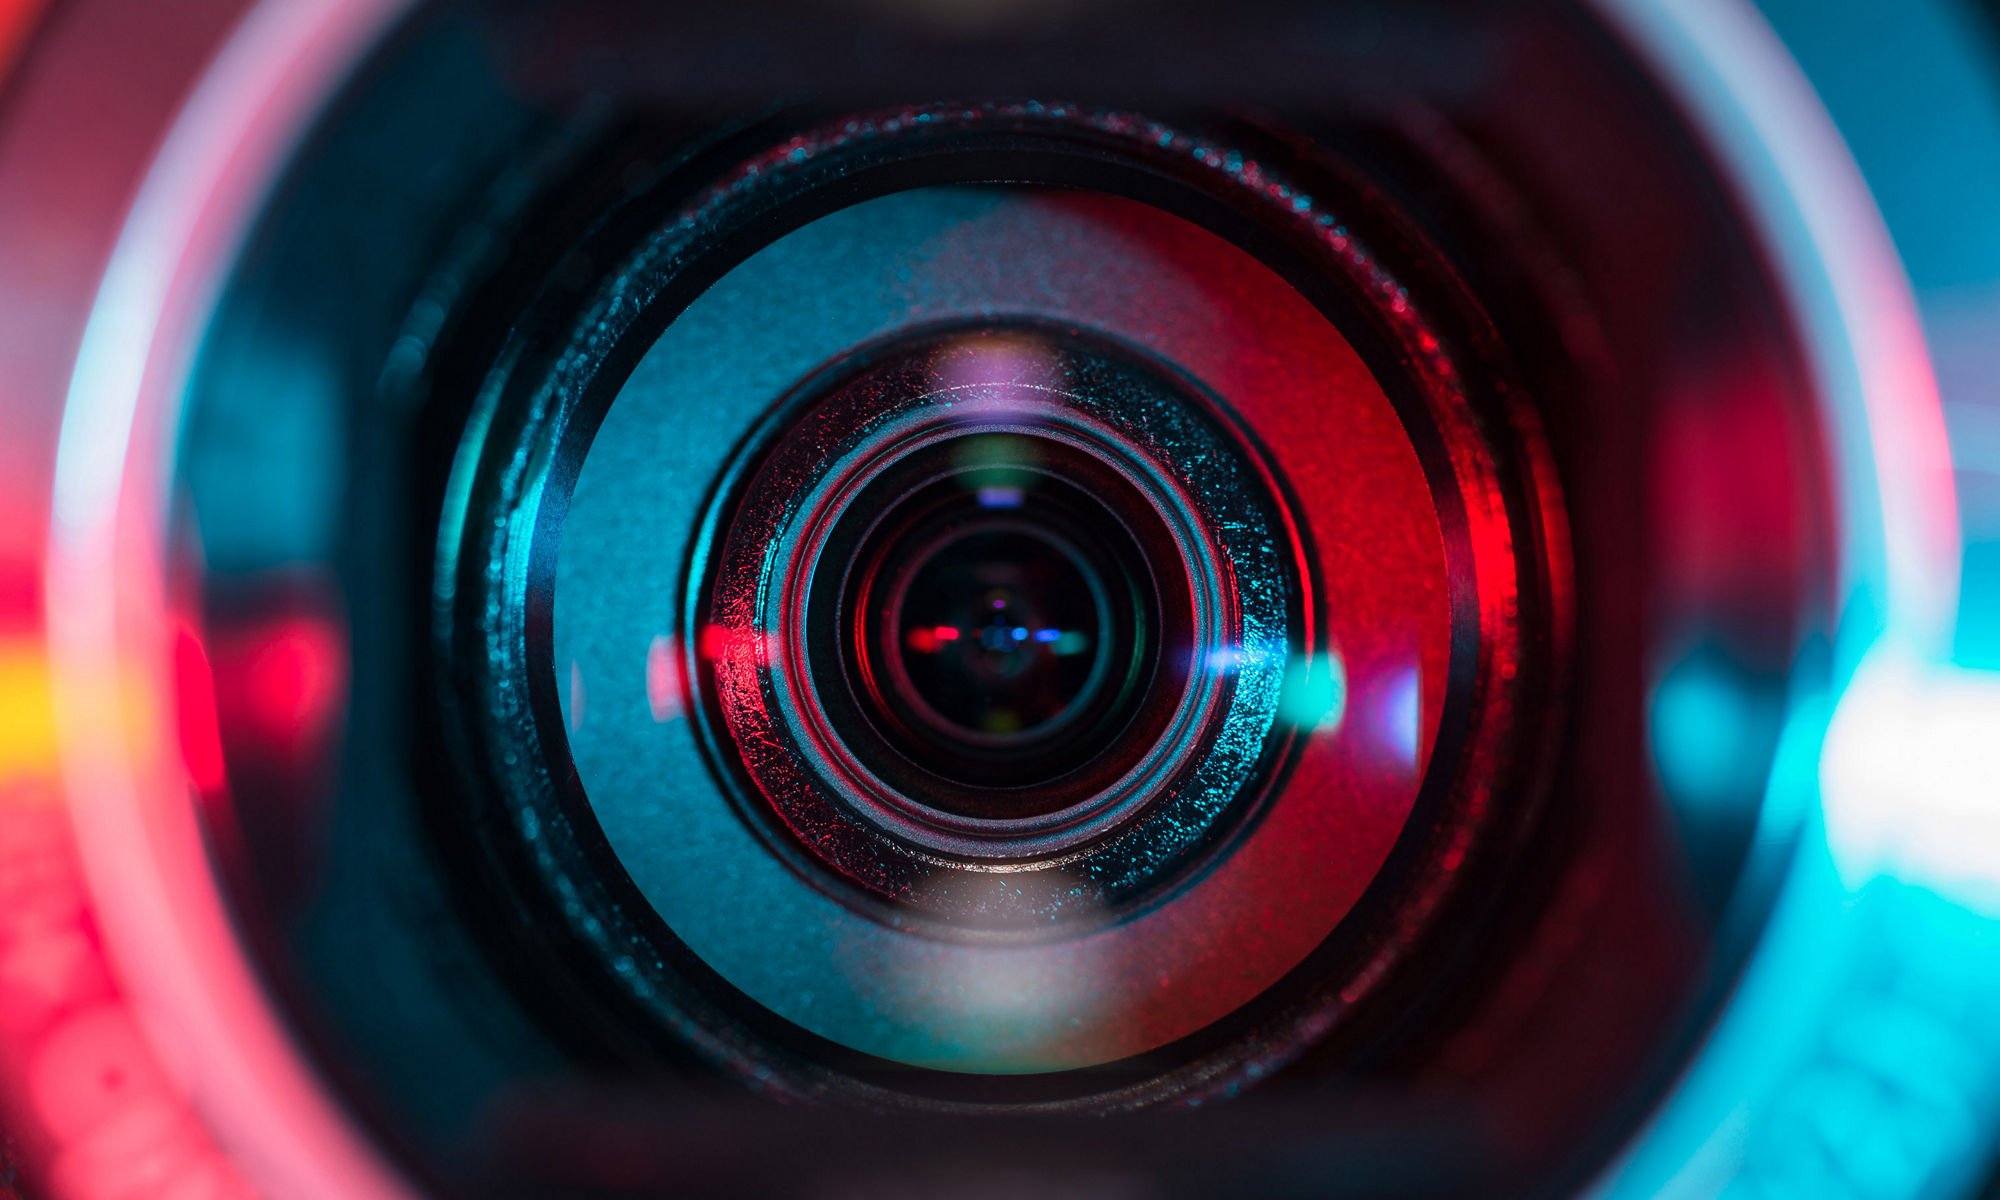 Camera lens with purple and pink backlight